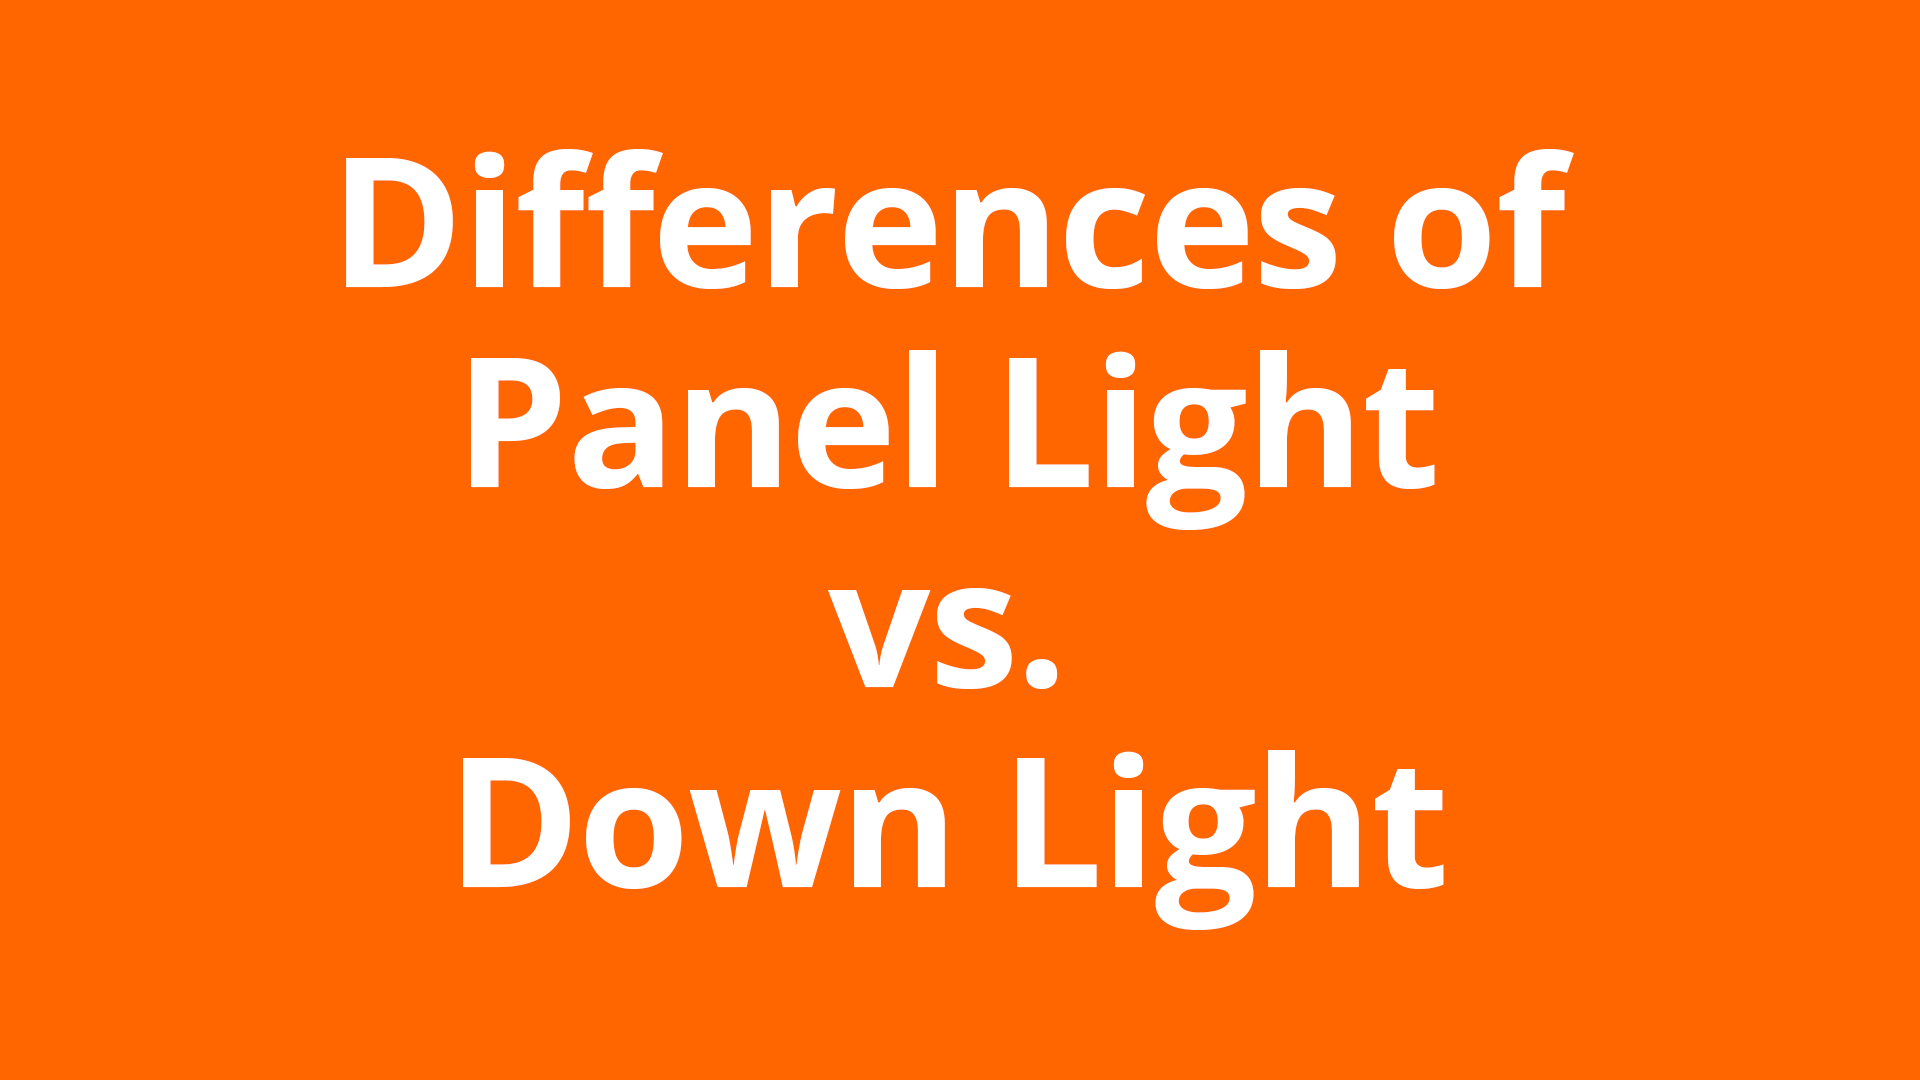 Differences of Panel Light vs Down Light